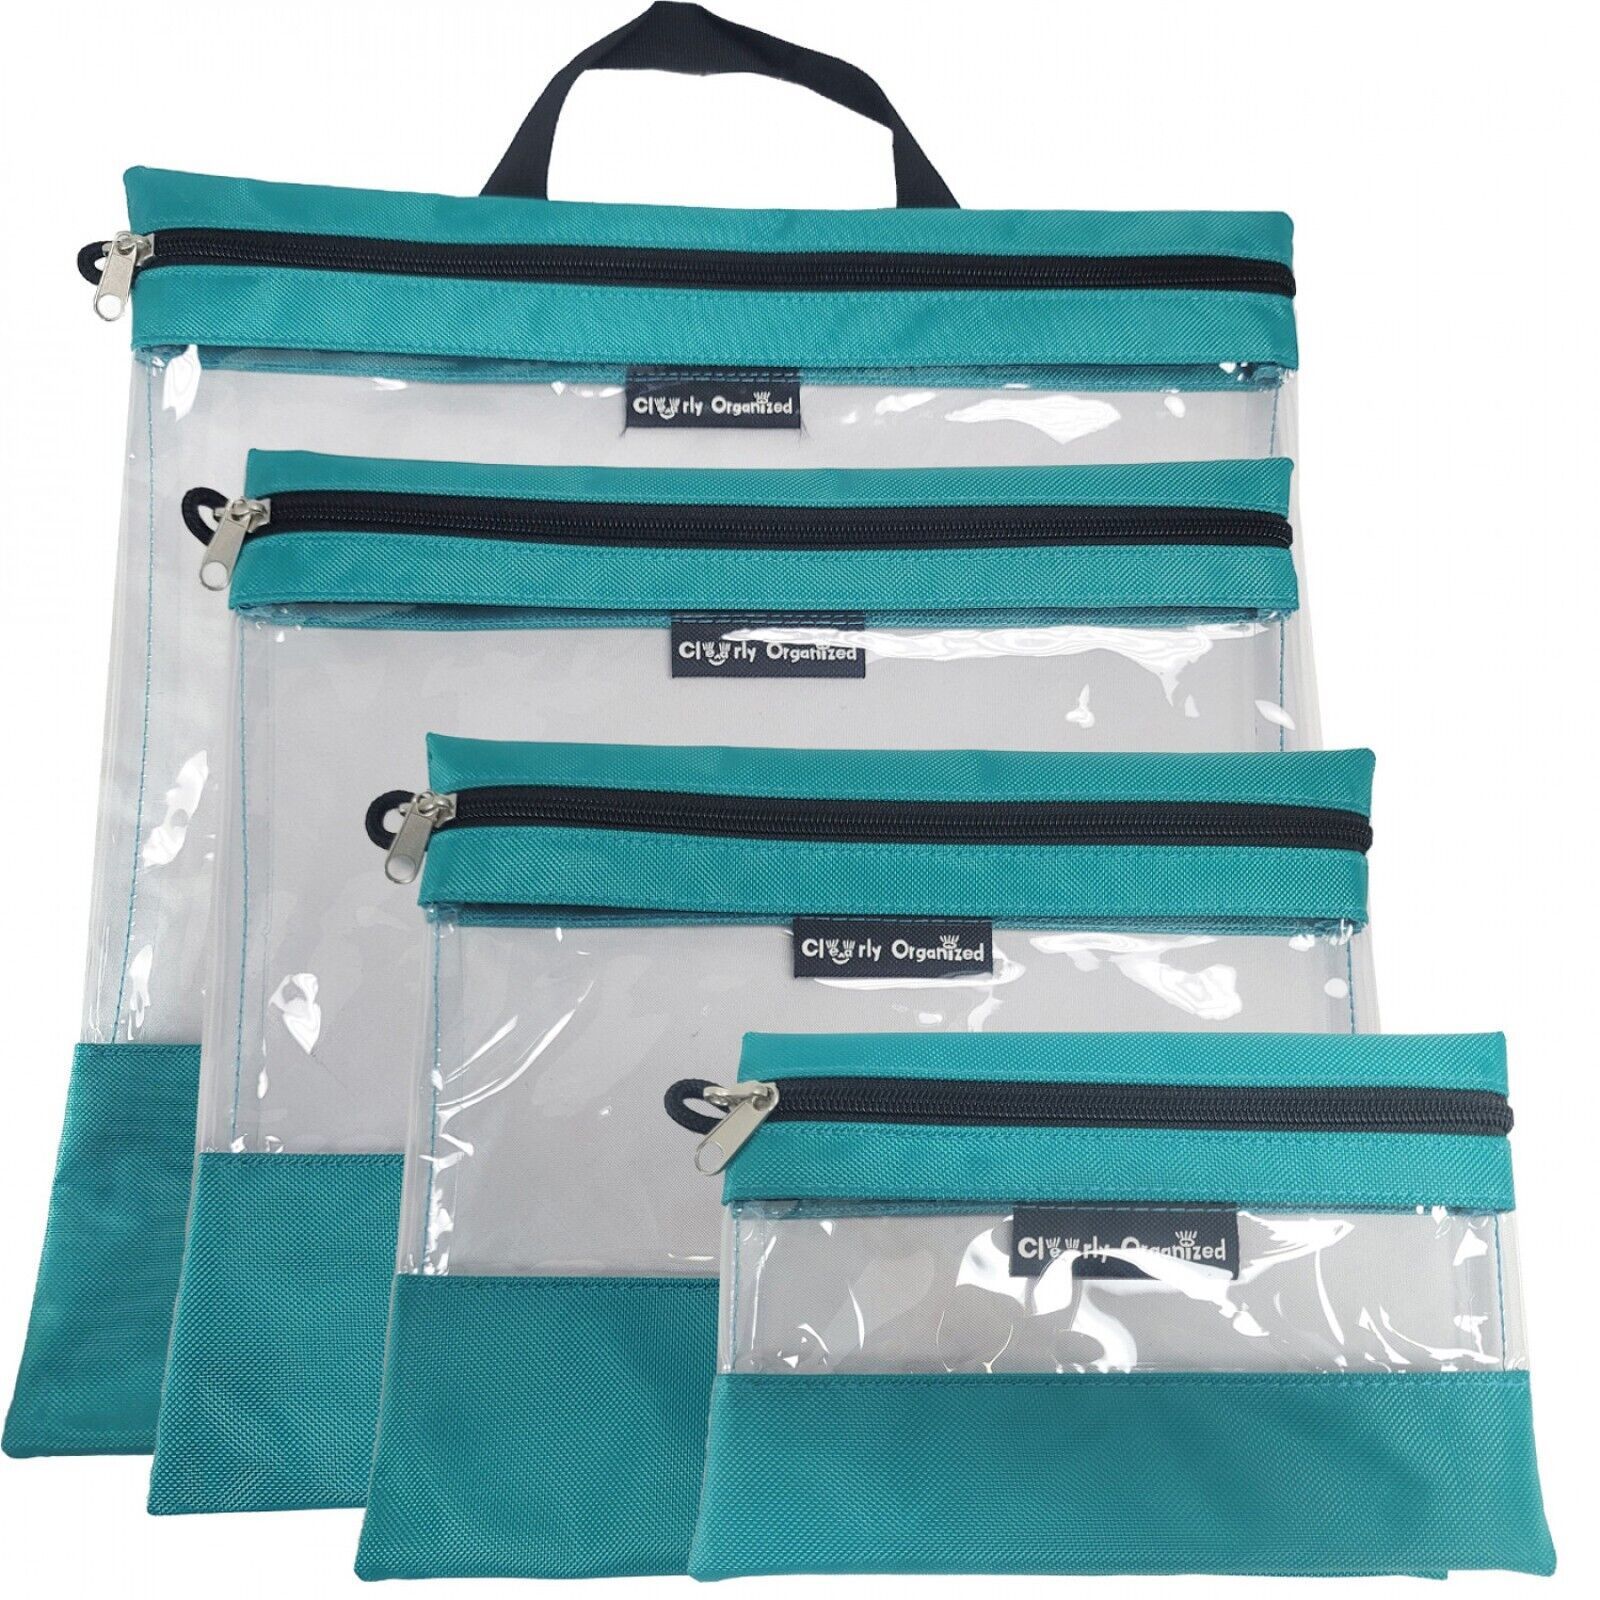 Clearly Organized The Clear Organizing Storage Bag Turquoise - $57.95